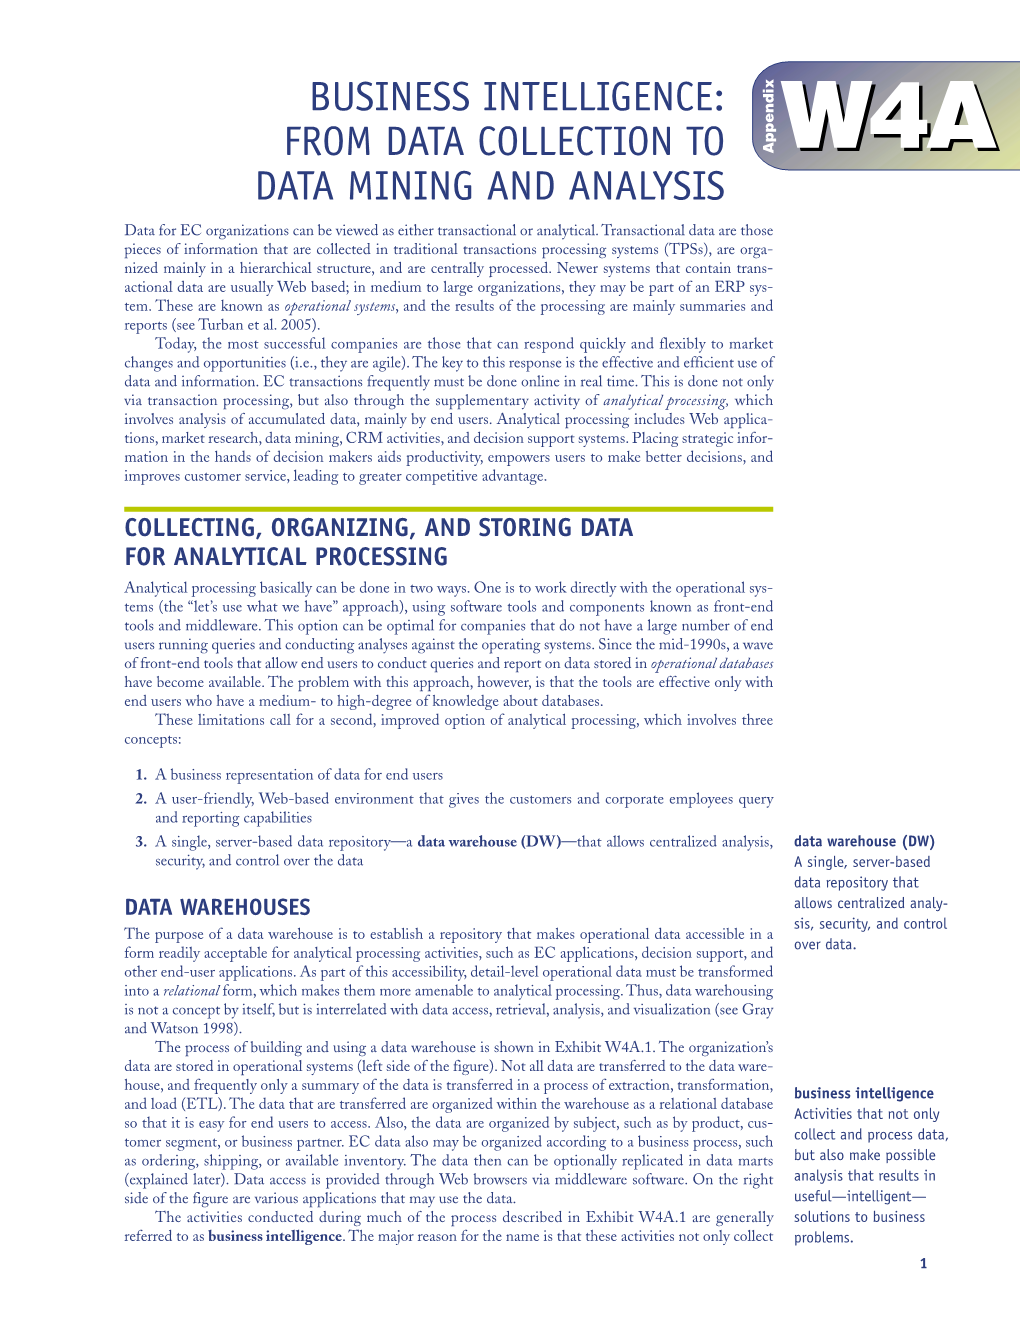 From Data Collection to Data Mining and Analysis